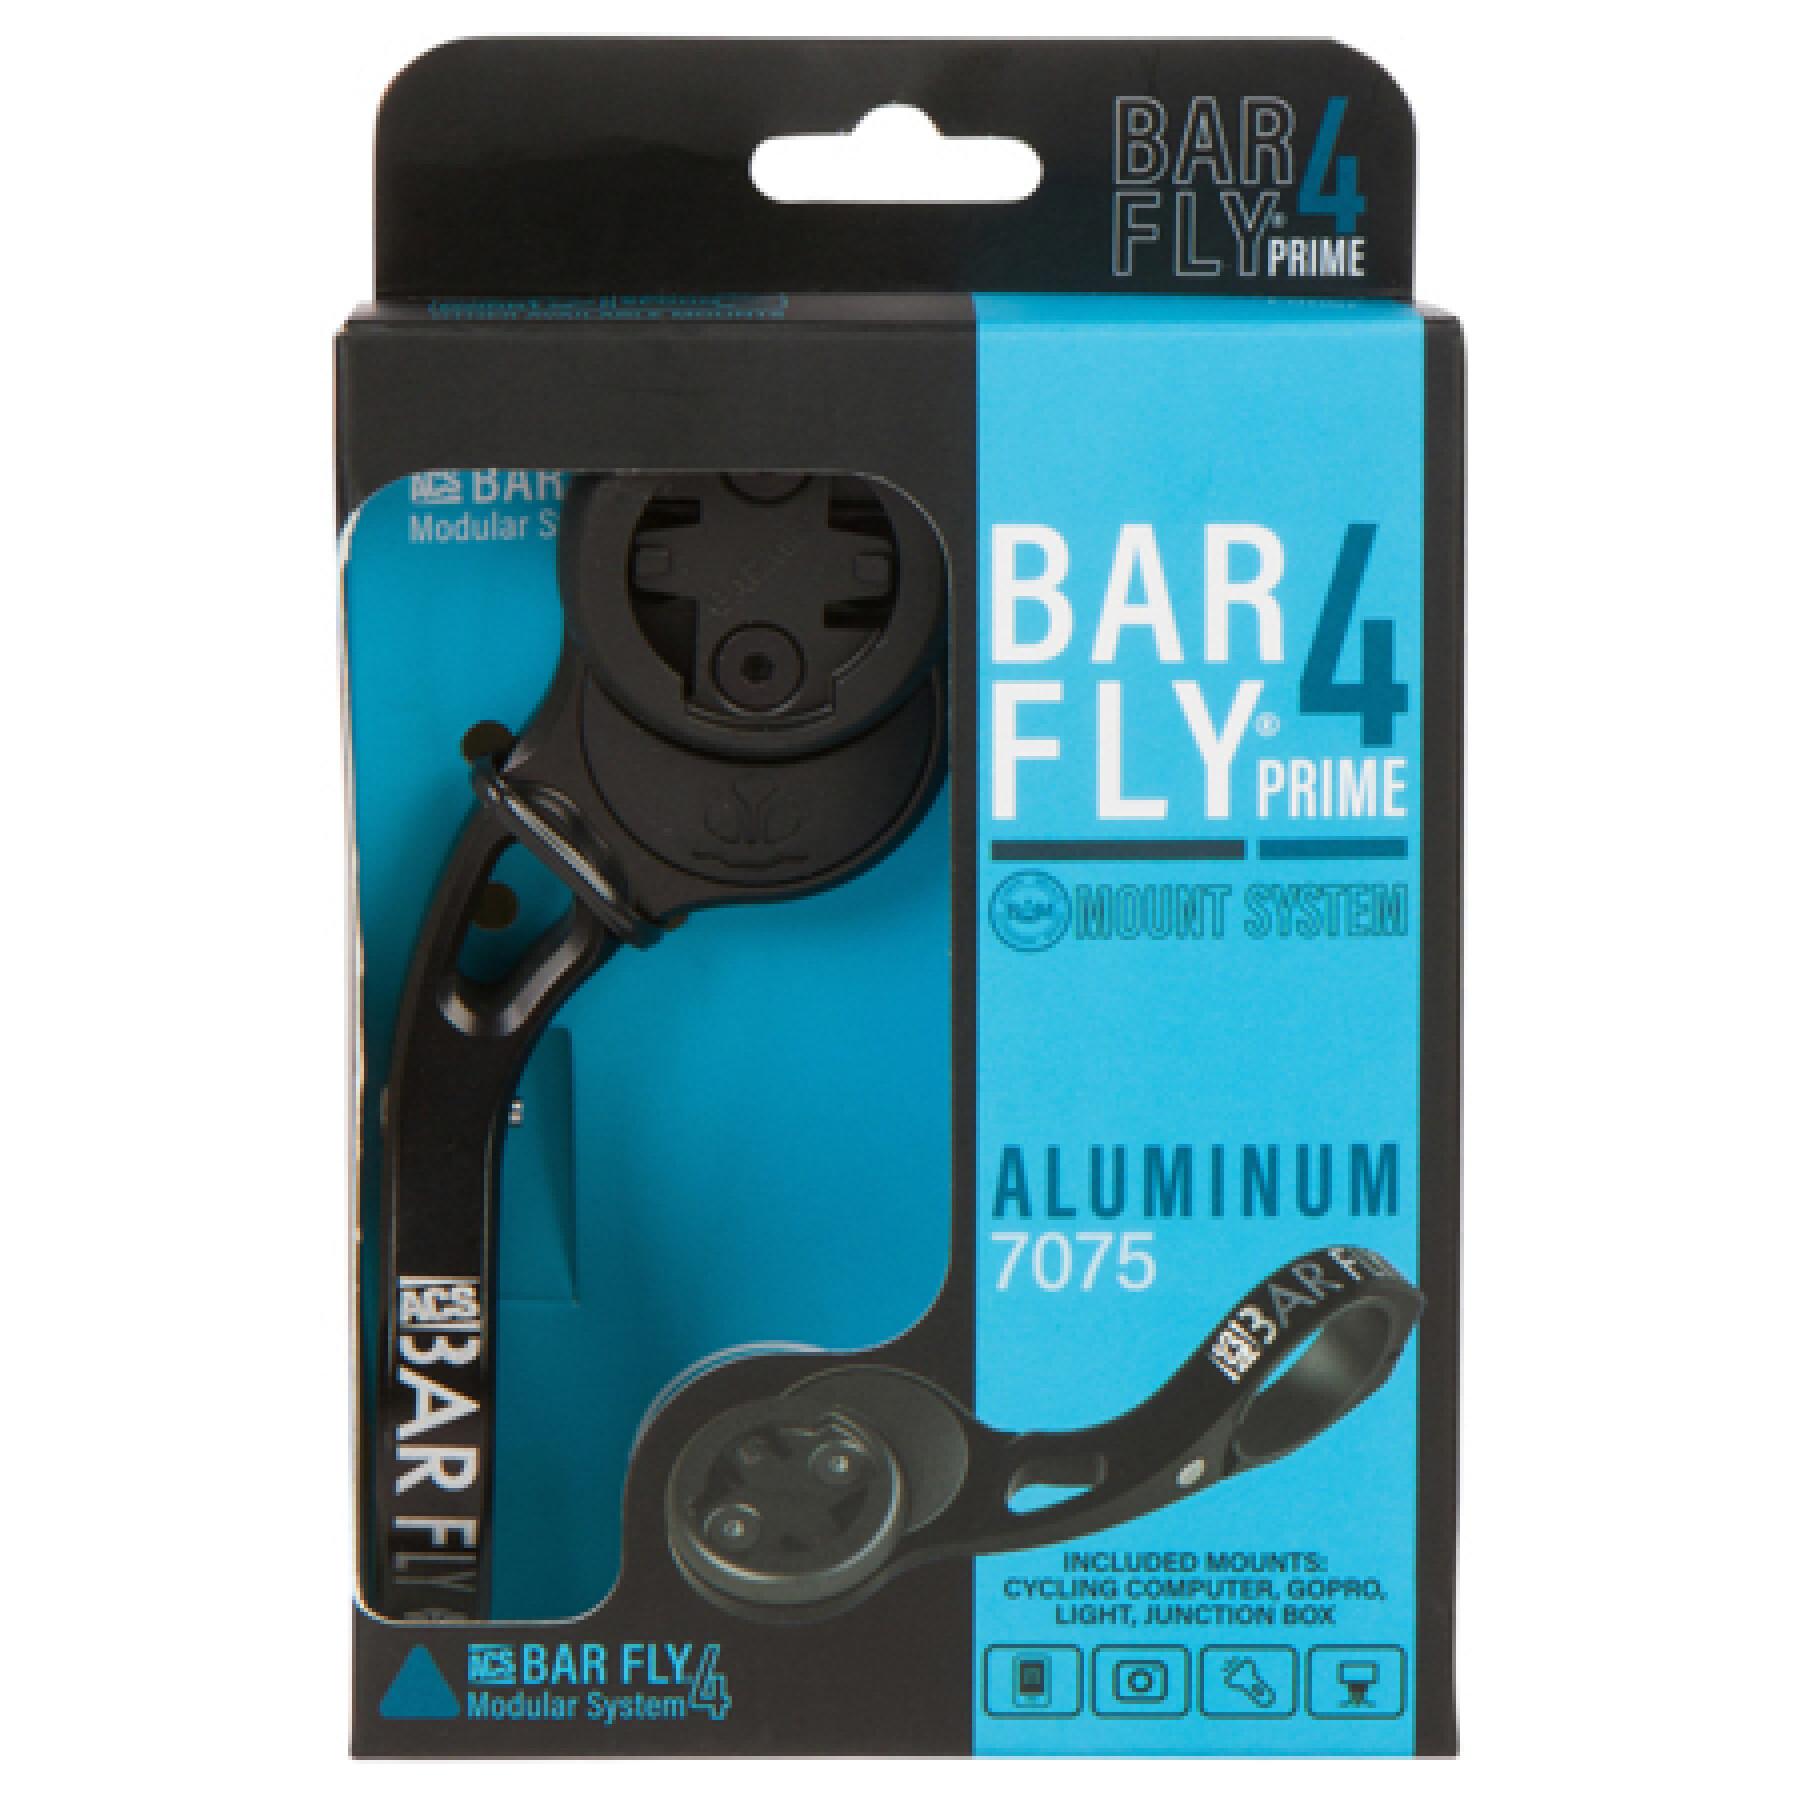 Supporto anteriore Barfly The Bar Fly 4 Prime